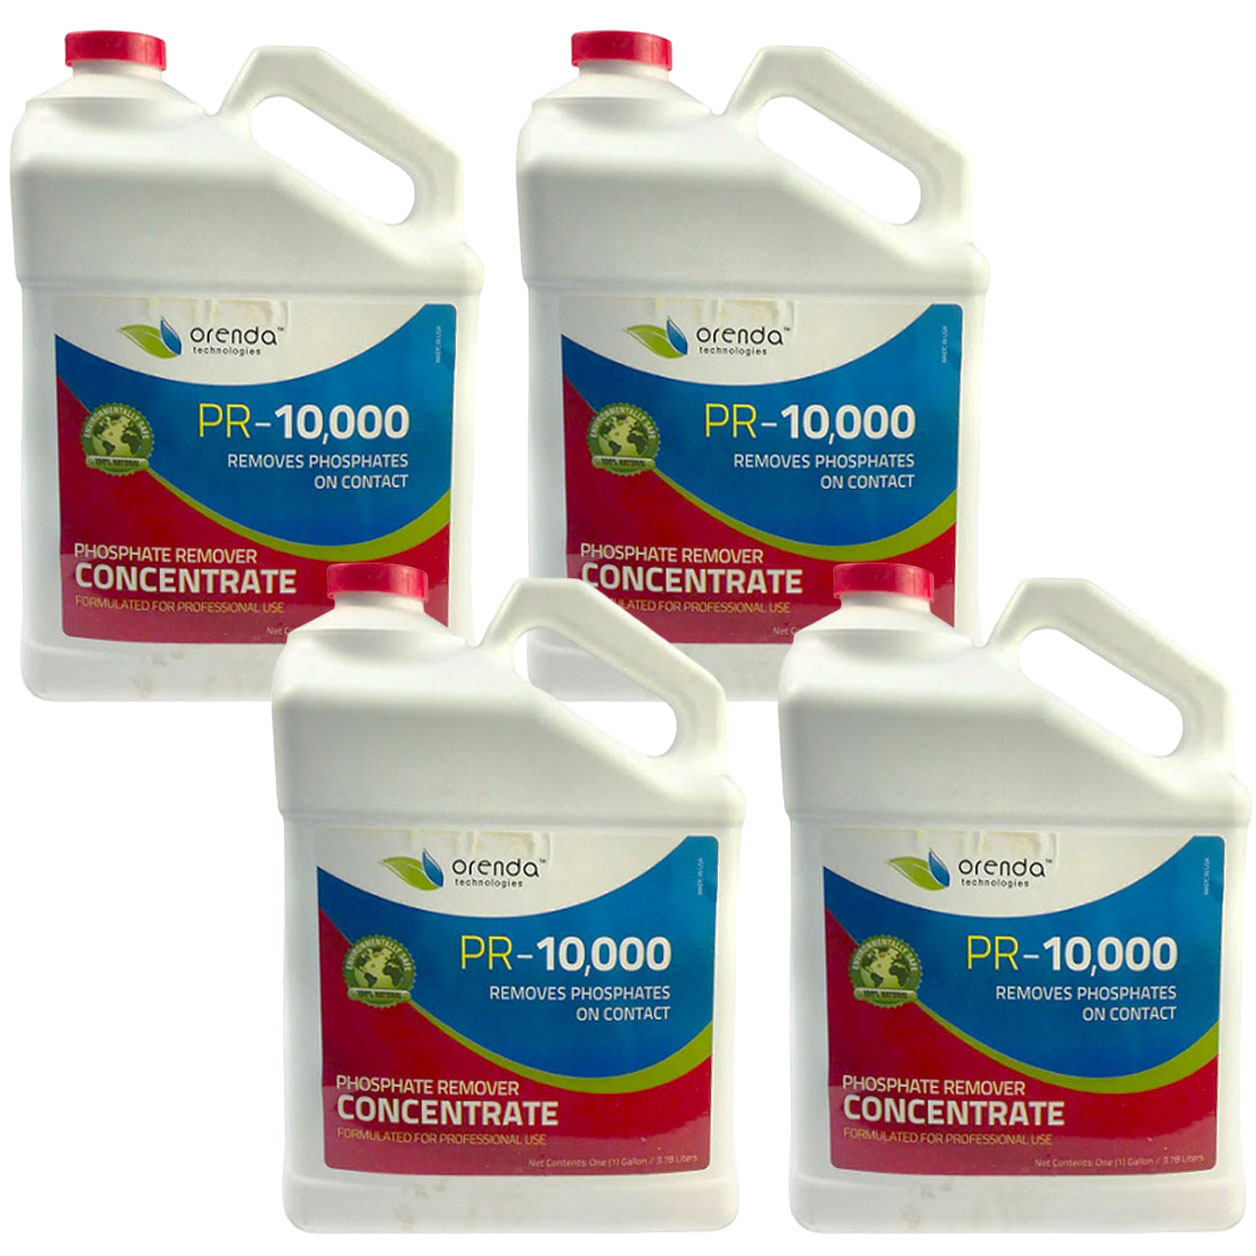 Orenda PR-10,000 Phosphate Remover Concentrate 1Gal. ORE-50-227 - 4 Pack